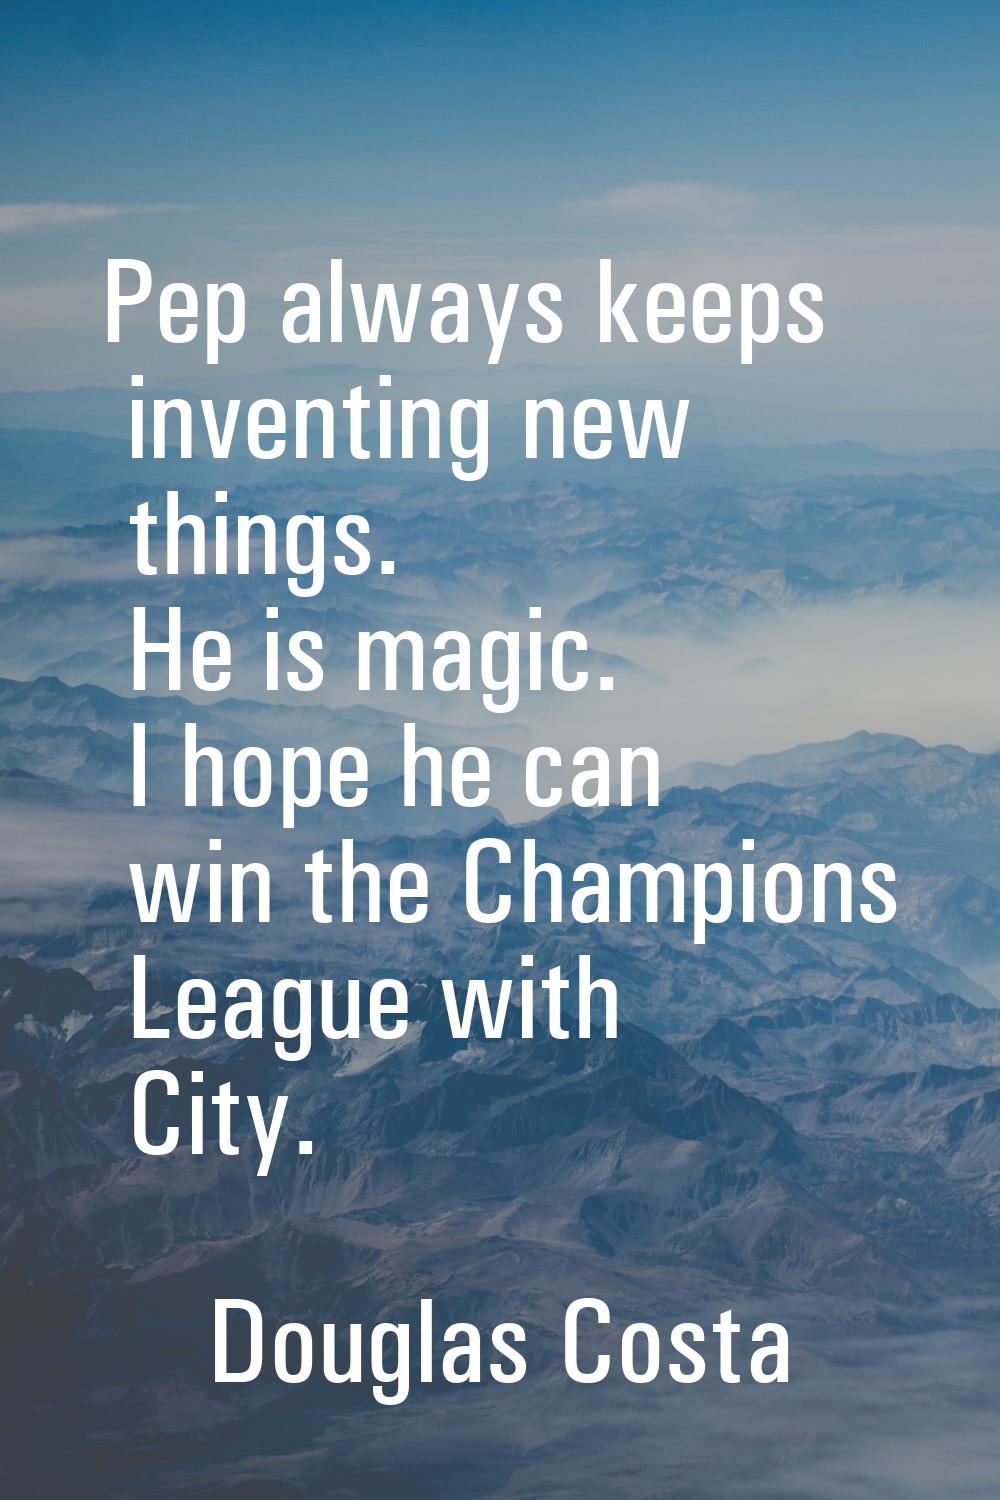 Pep always keeps inventing new things. He is magic. I hope he can win the Champions League with Cit